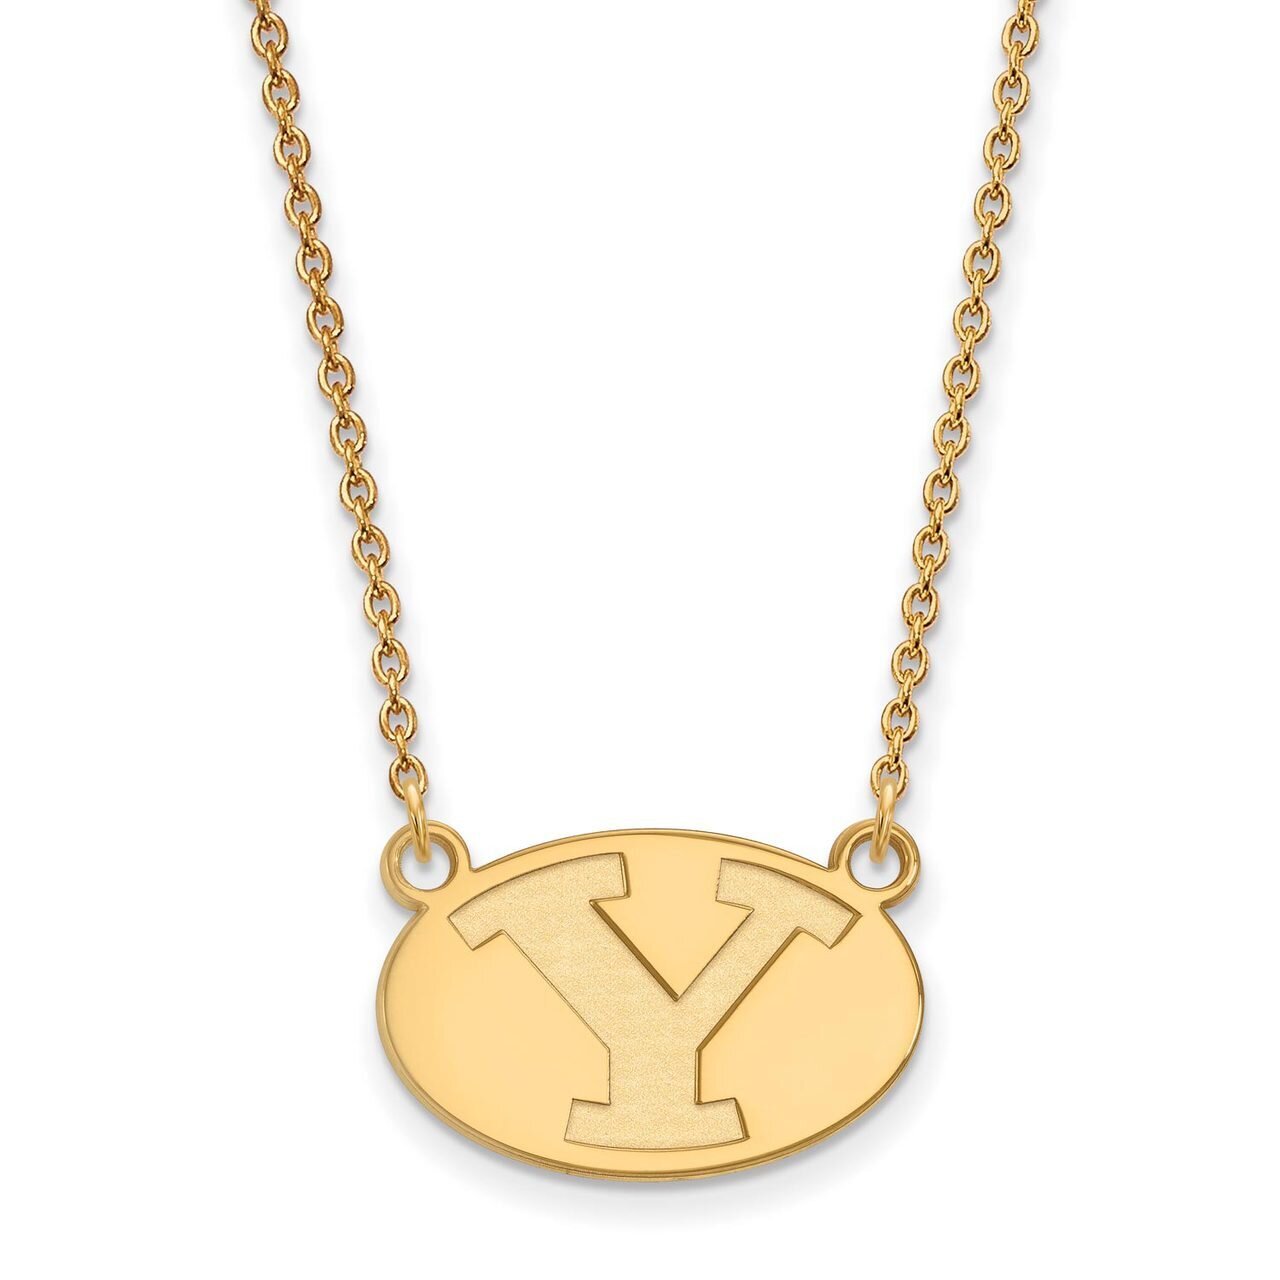 Brigham Young University Small Pendant with Chain Necklace 10k Yellow Gold 1Y009BYU-18